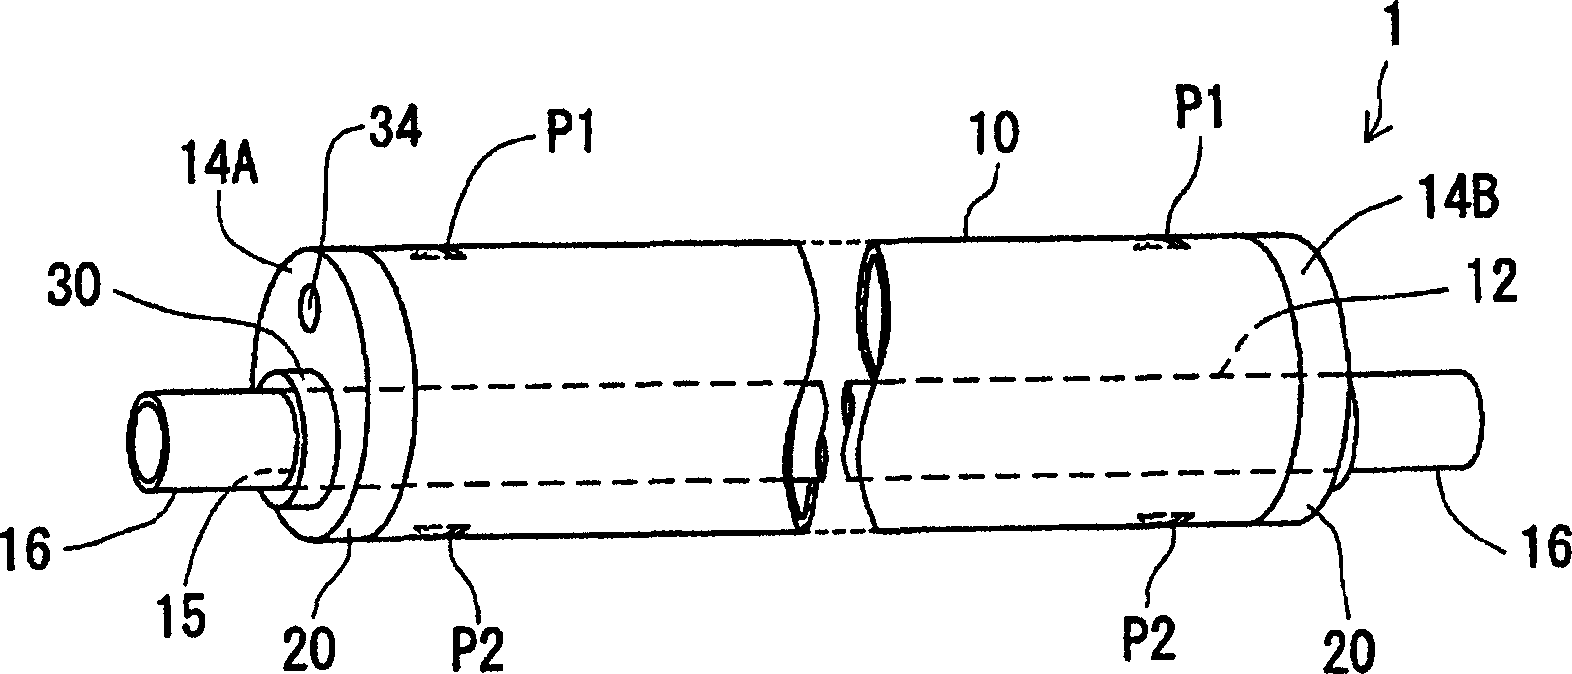 Thermosyphon and method of manufacturing the same